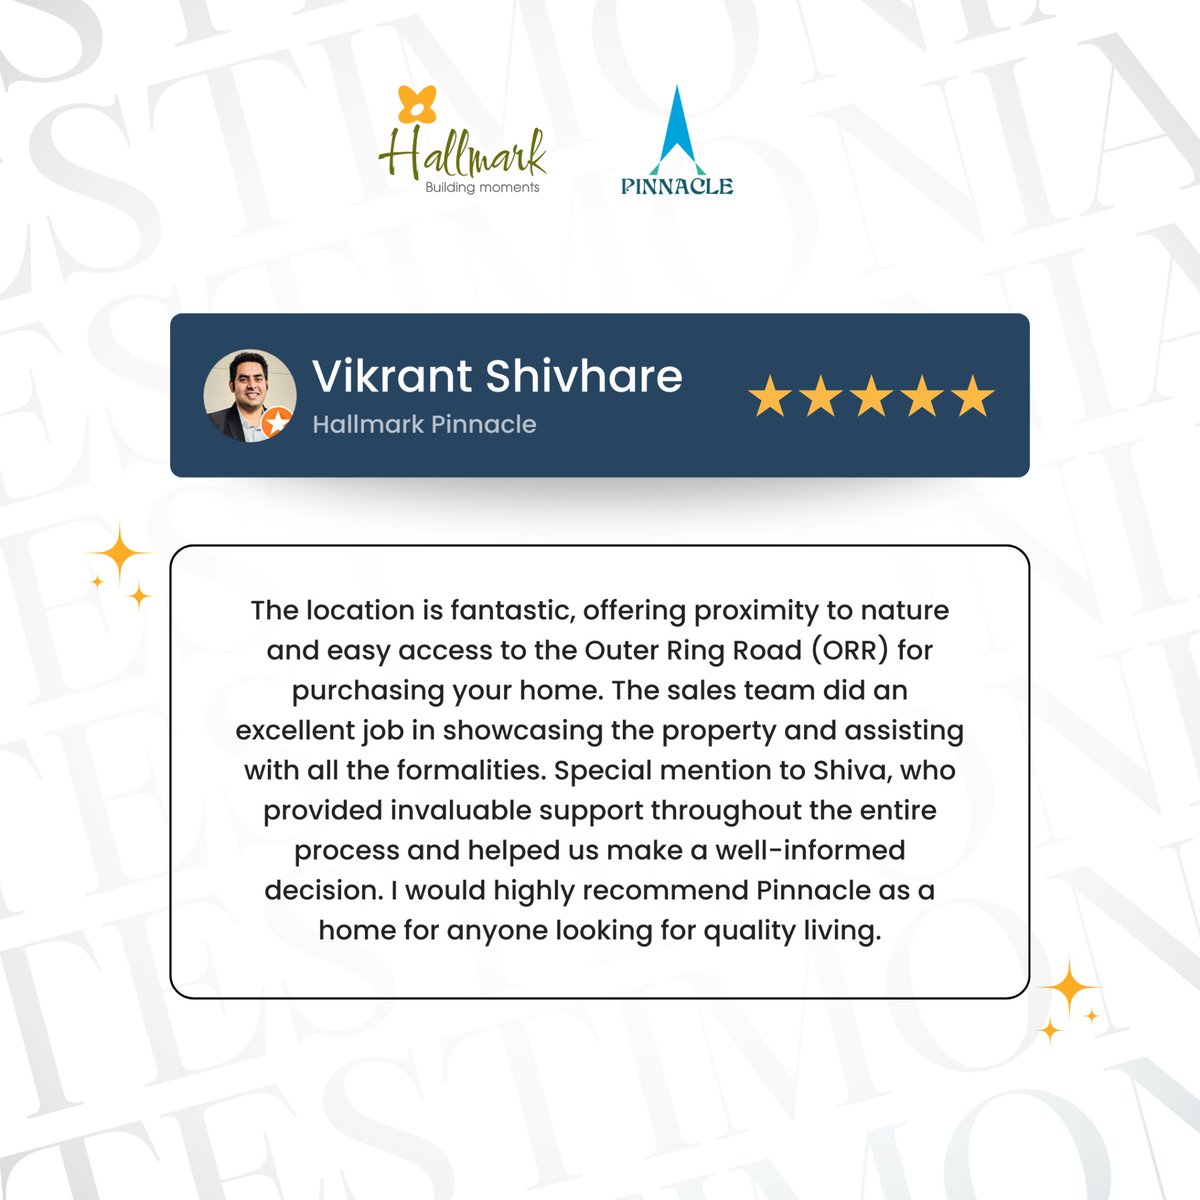 Thank you very much for your kind feedback! Your encouragement boosts our spirits and inspires us to keep improving:)

#HallmarkBuilders #ClientReview #Hyderabad #RealEstate